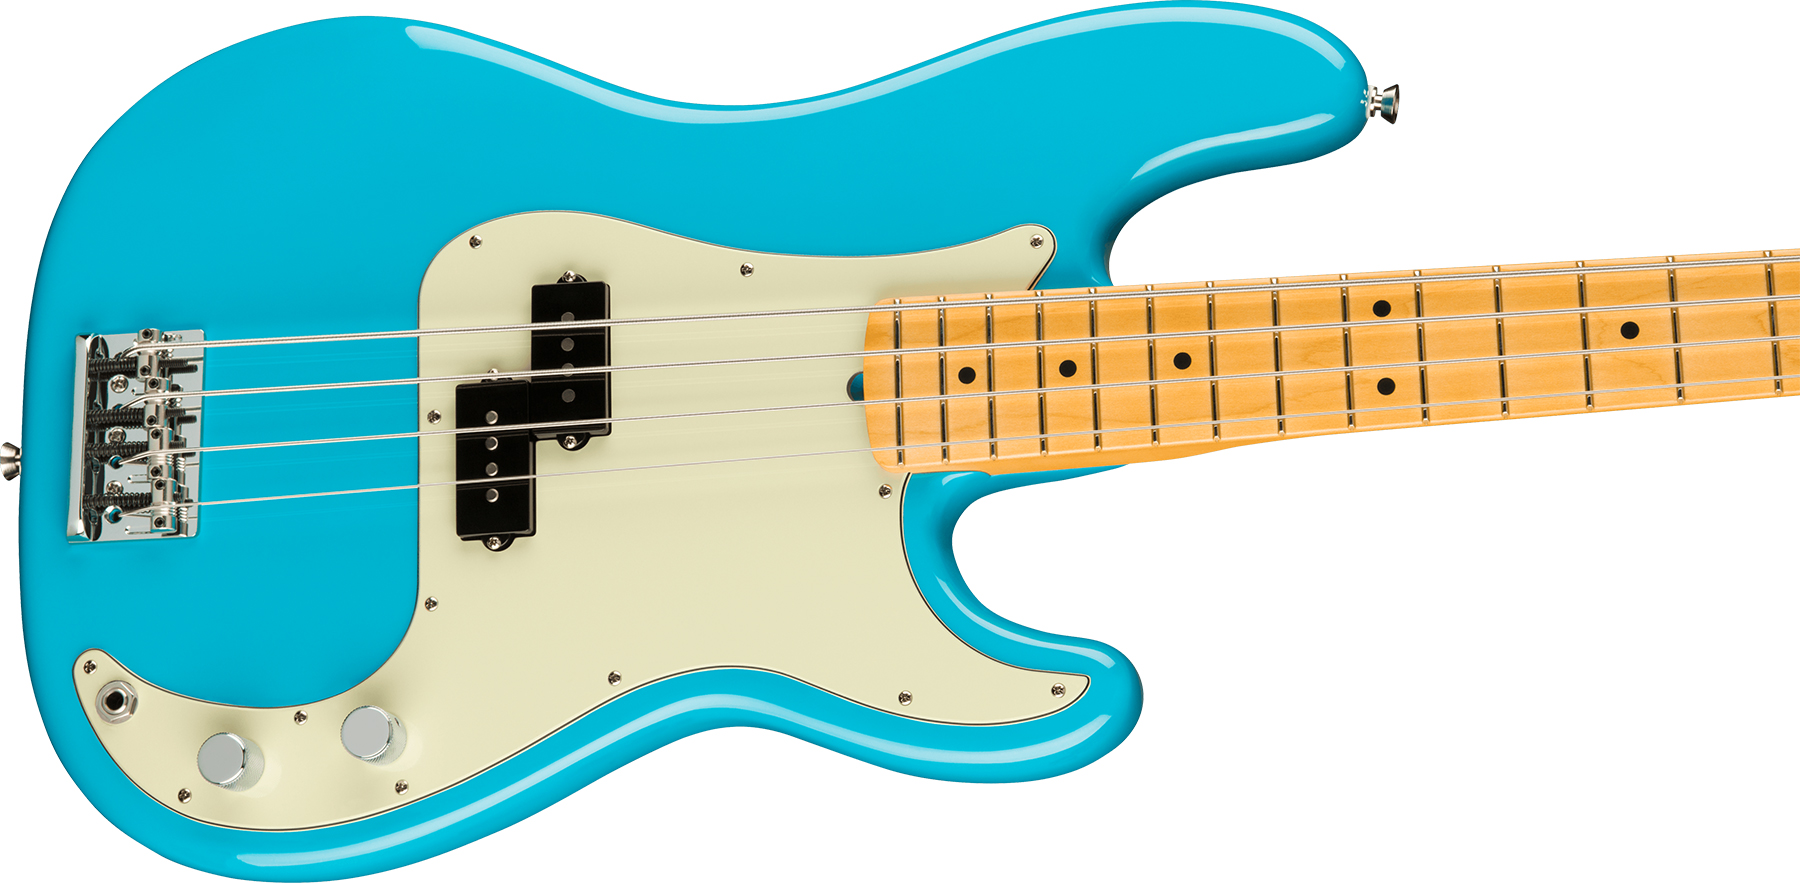 Fender Precision Bass American Professional Ii Usa Mn - Miami Blue - Basse Électrique Solid Body - Variation 2